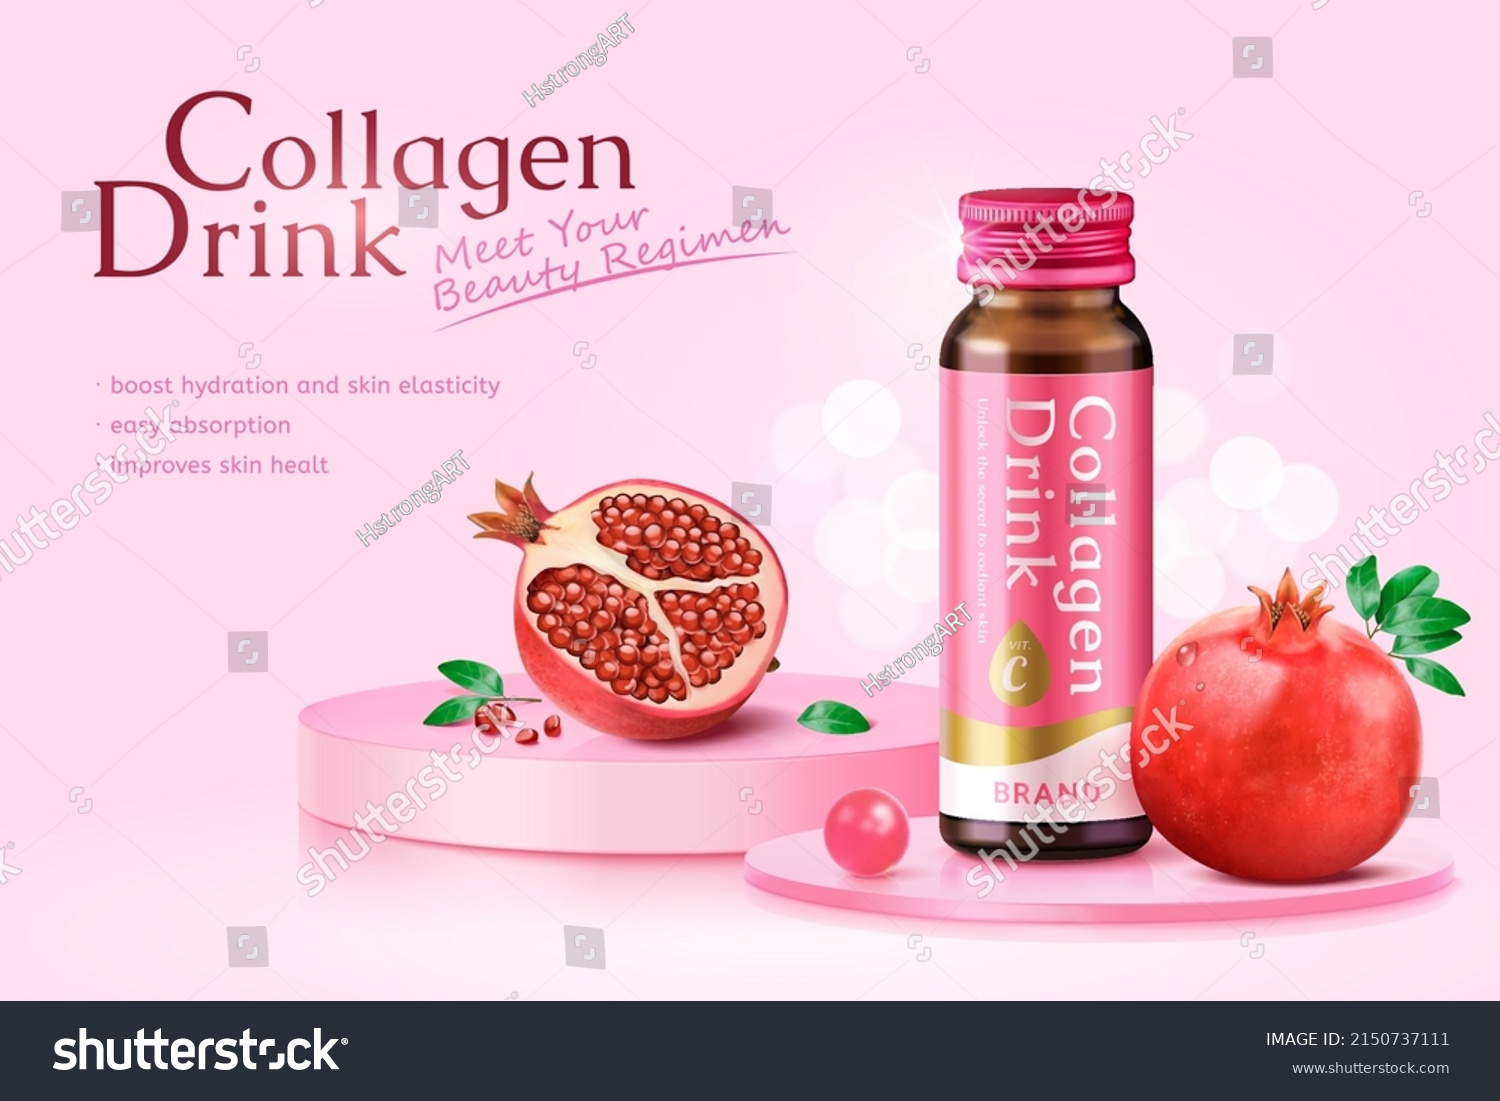 3d pink monotone supplement product ad template. Collagen drink bottle mock-up and fresh pomegranate fruit displayed on glass podiums. #2150737111